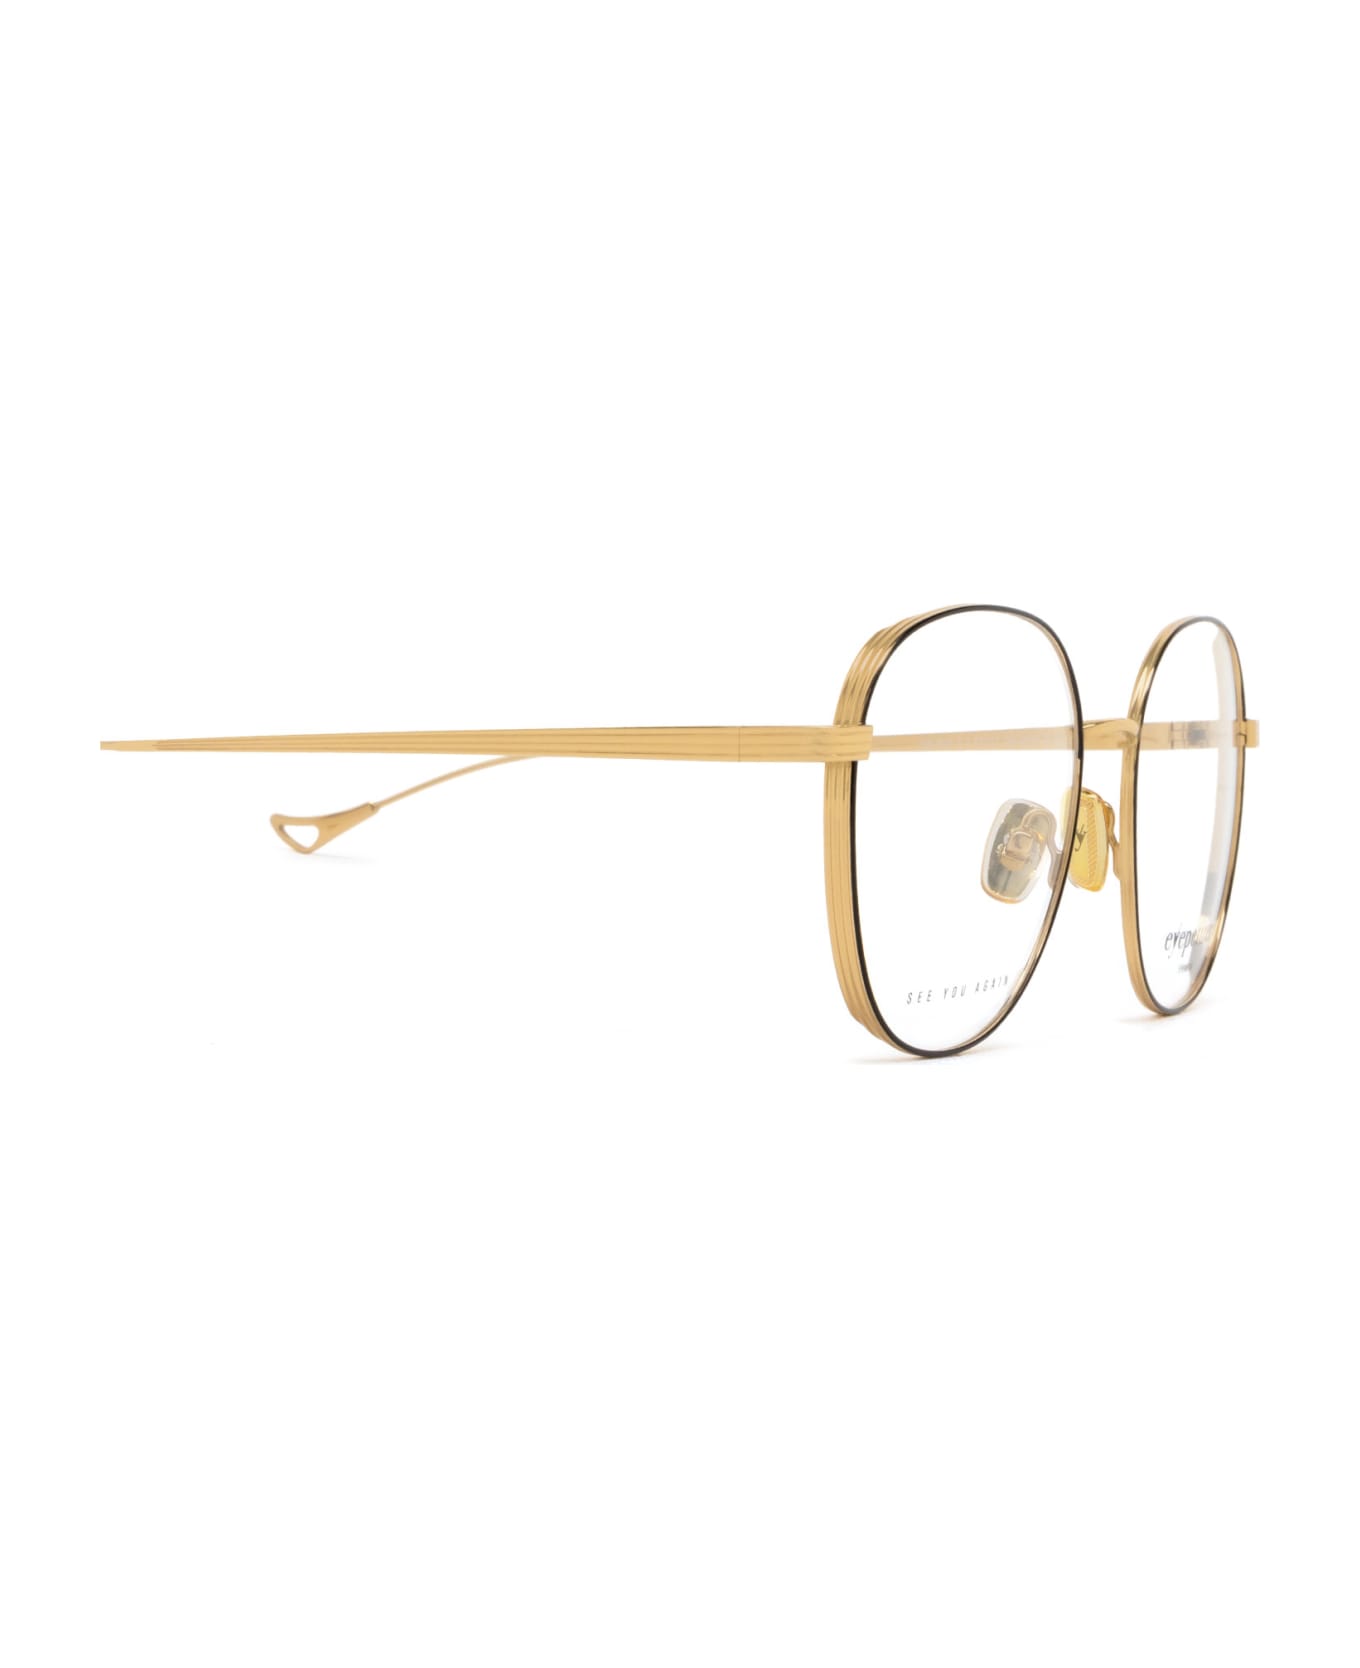 Eyepetizer Nelson Pale Gold Glasses - Pale Gold アイウェア